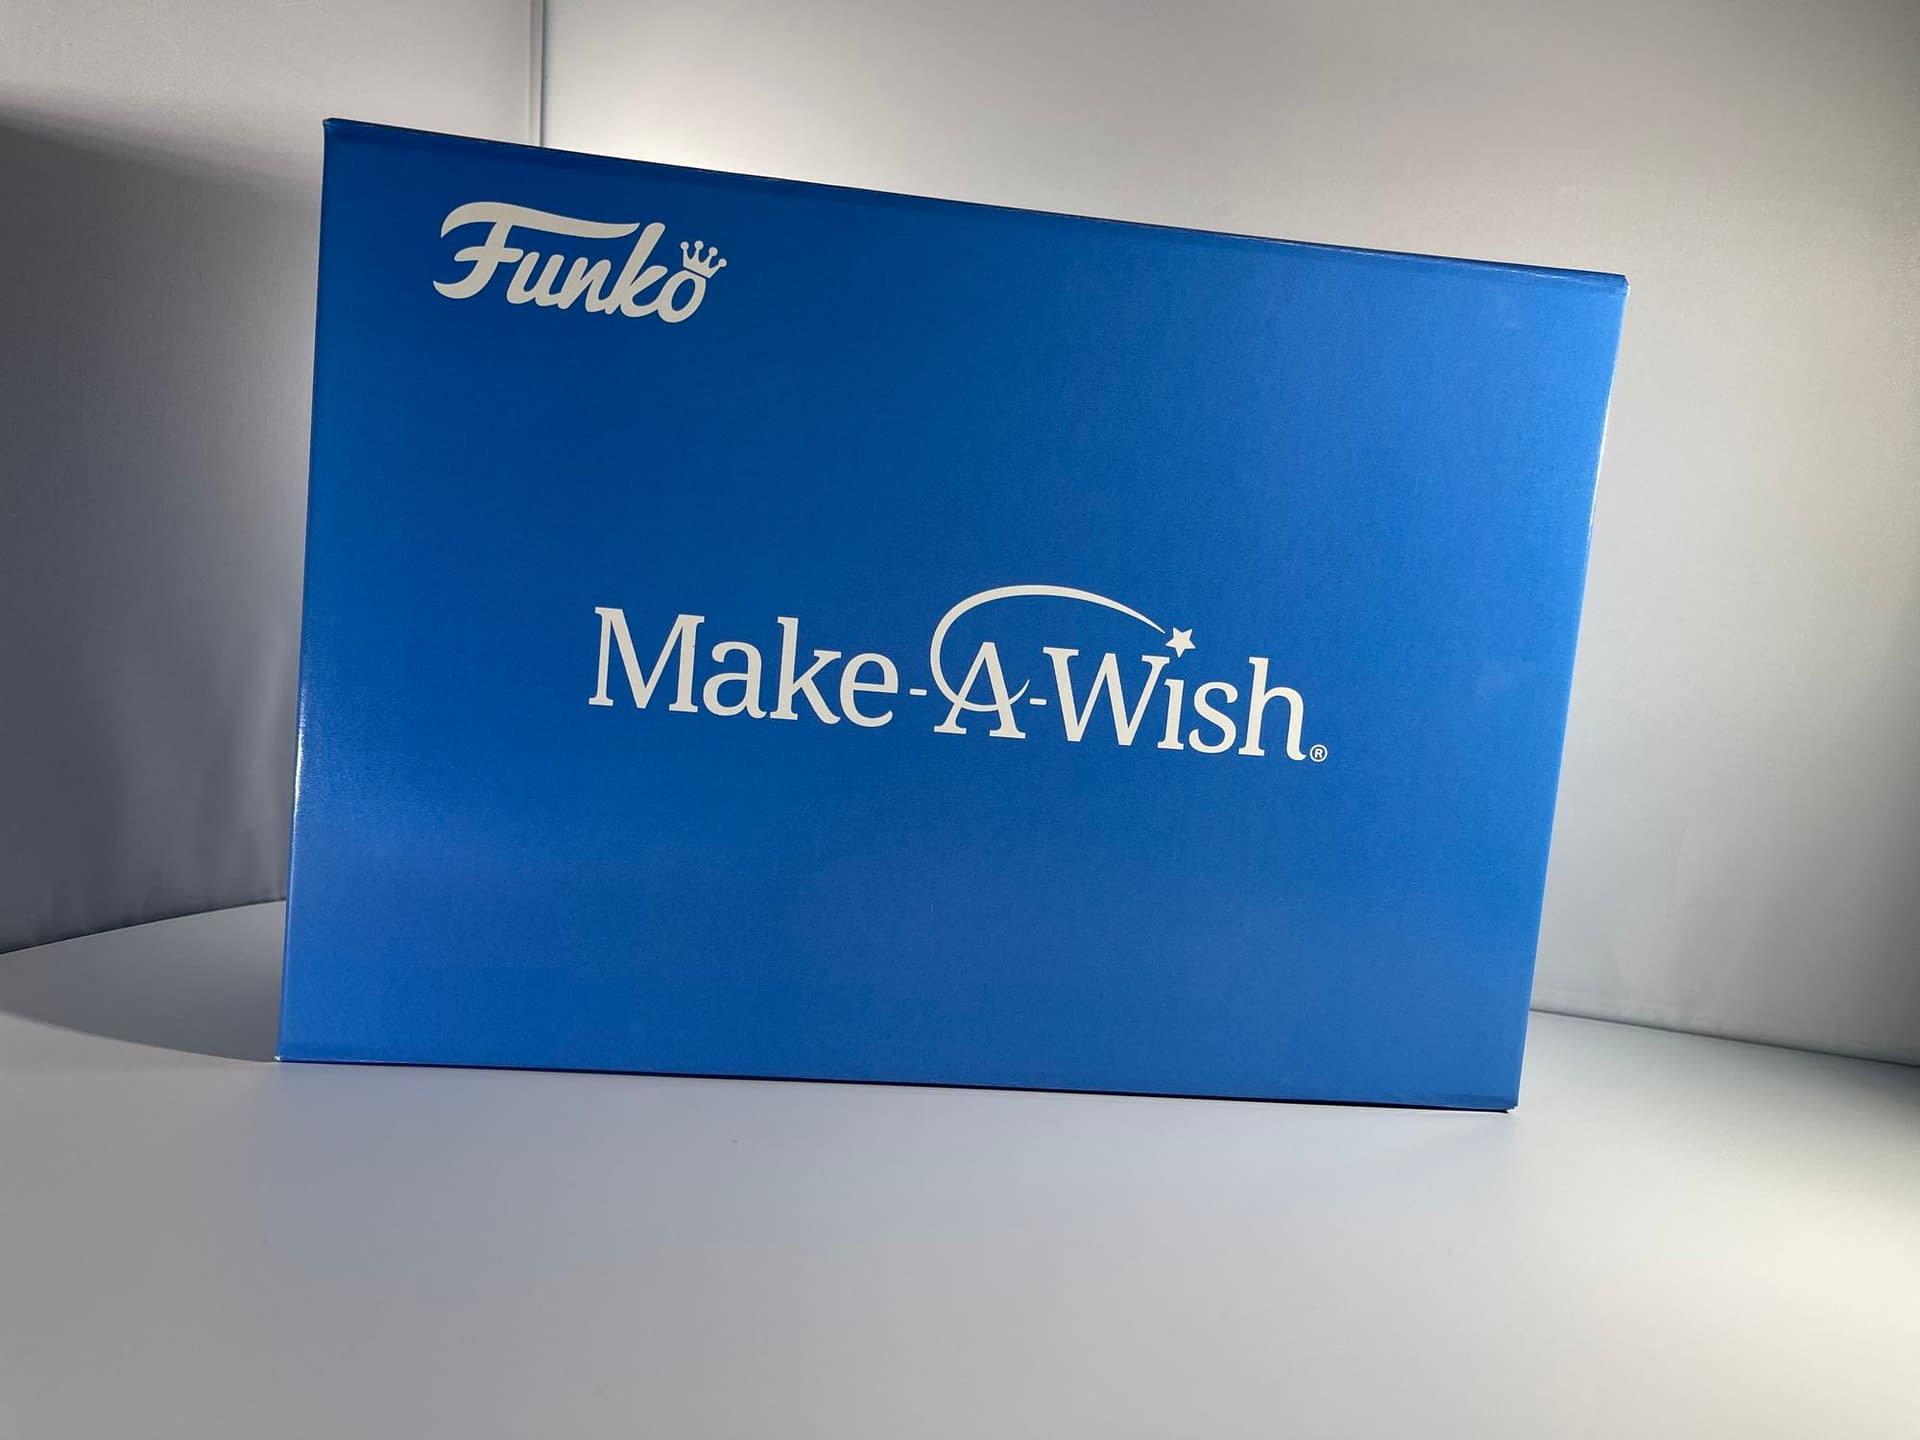 Funko's New Make A Wish Pops! With Purpose is Truly Something Sweet